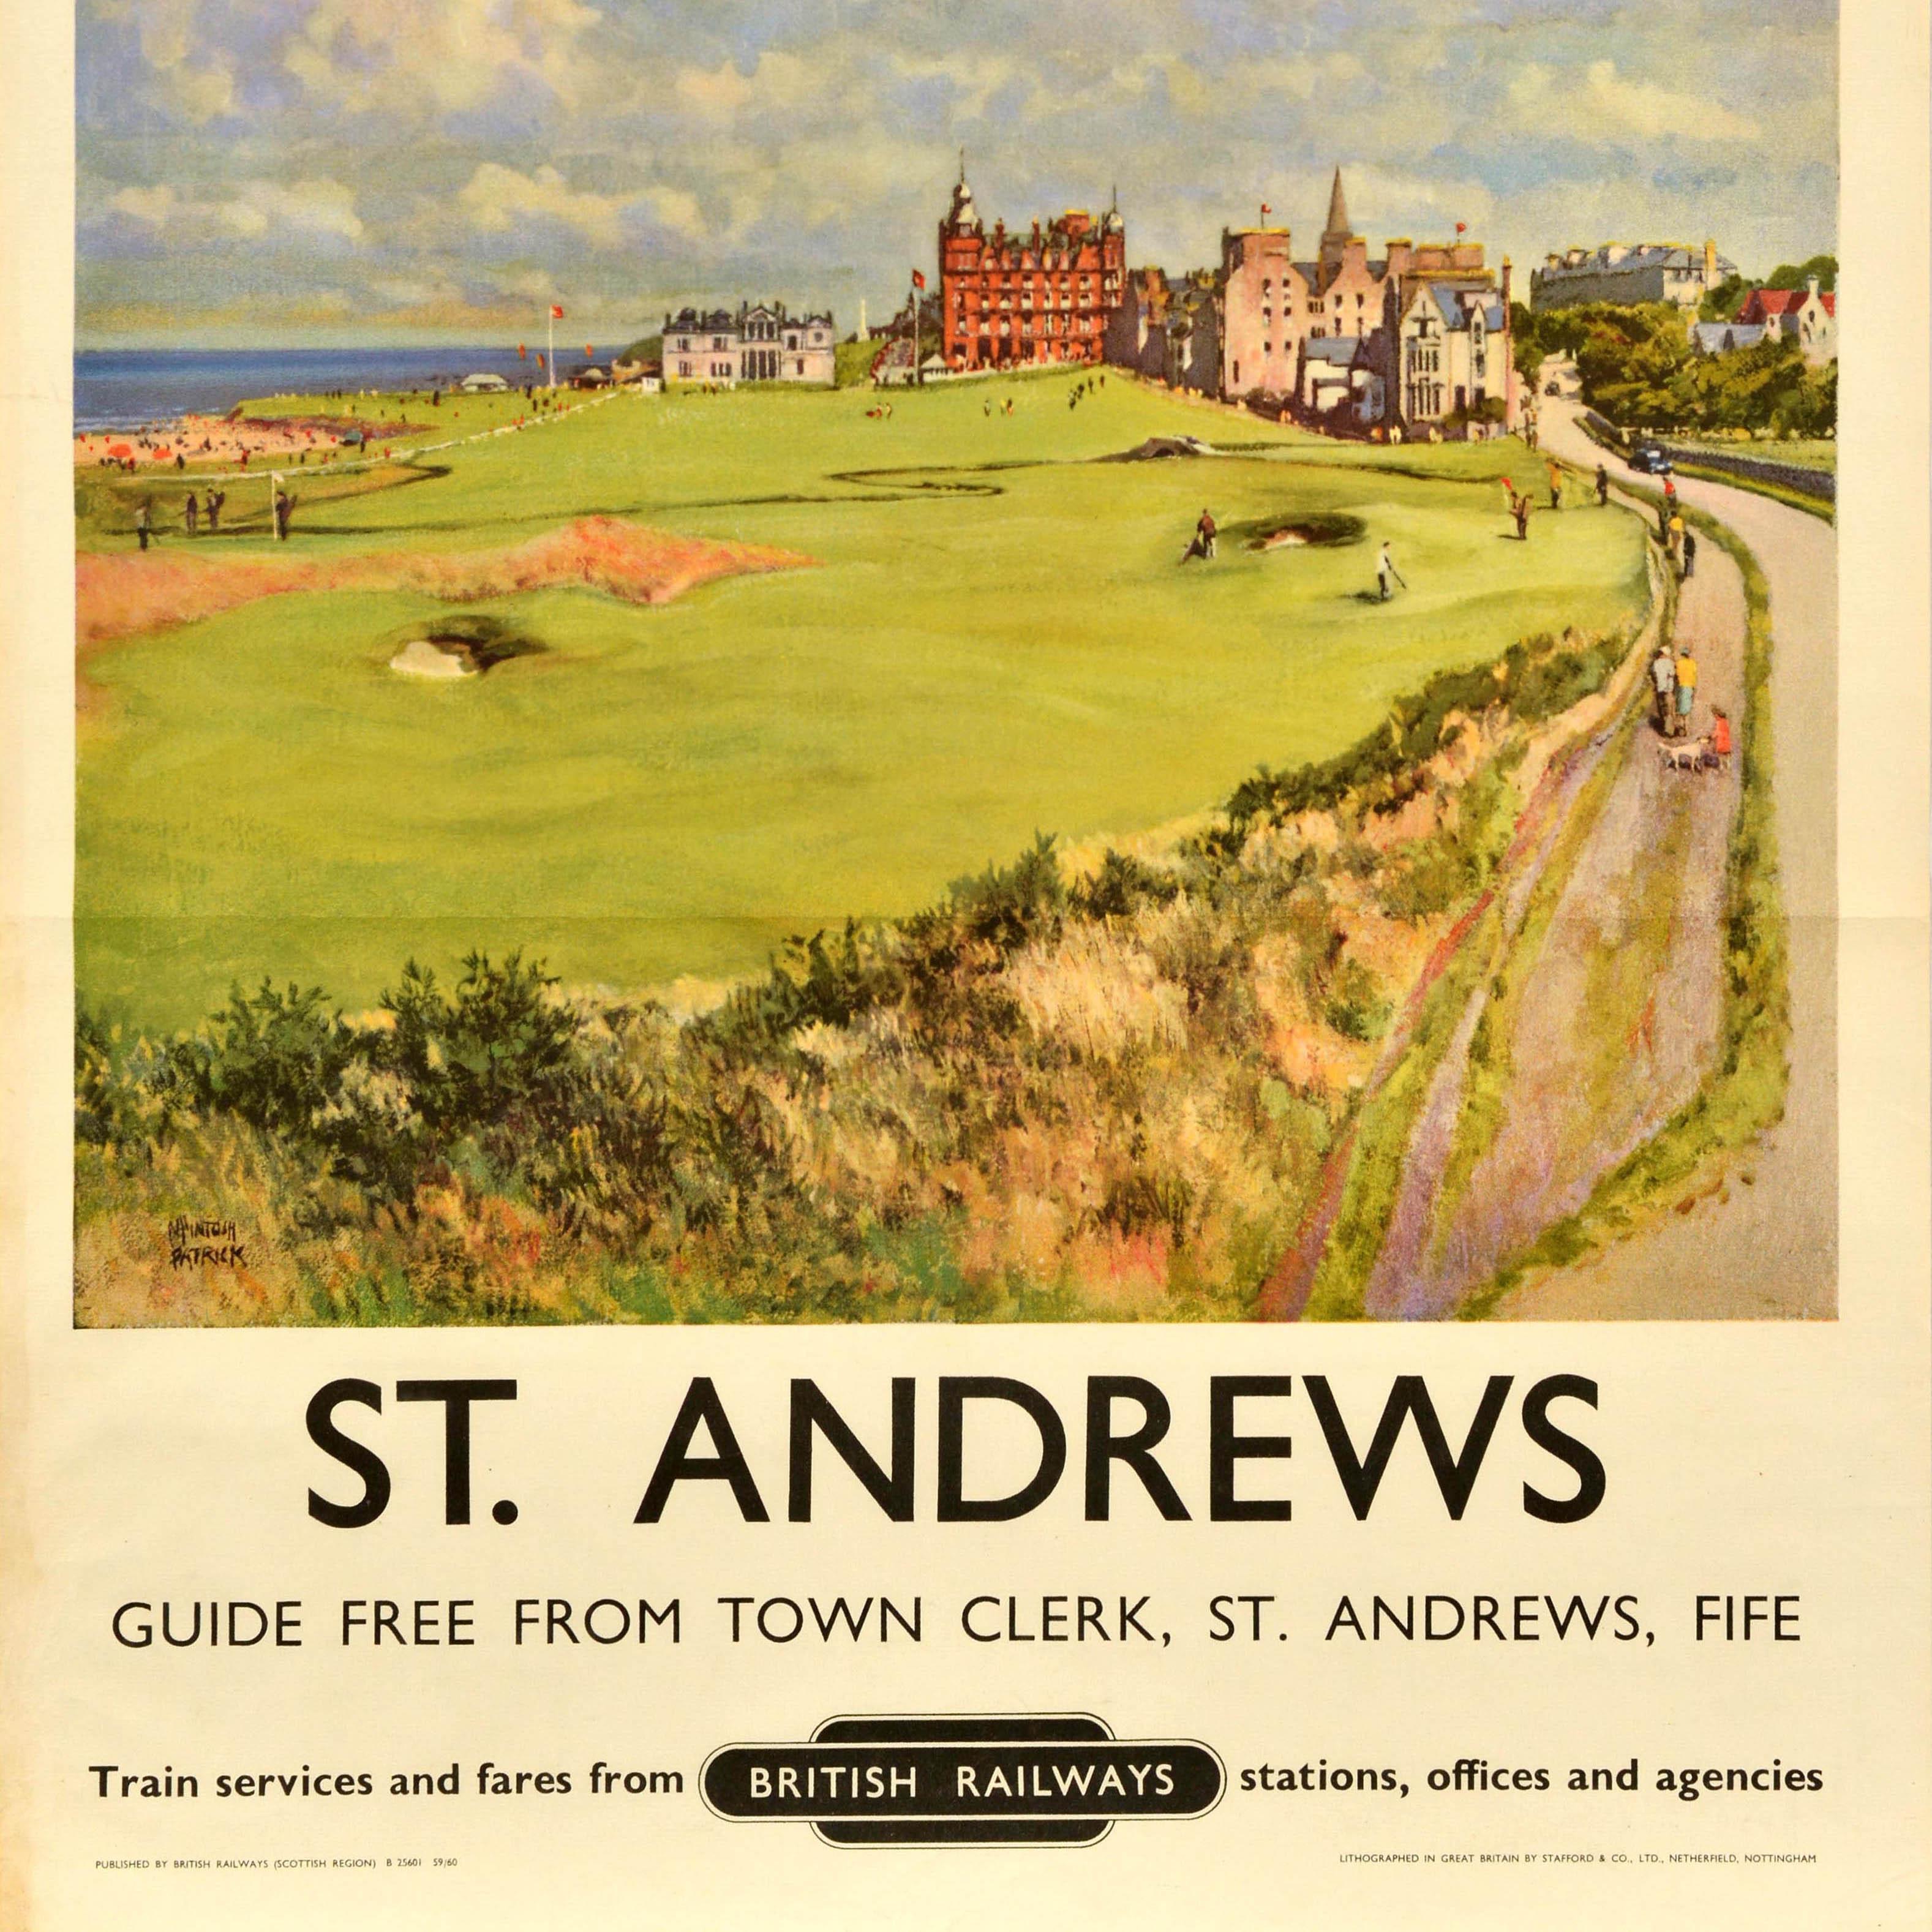 Original vintage British Railways train travel poster for St Andrews featuring a colourful image by James McIntosh Patrick (1907-1998) depicting players on the historic St Andrews golf course in Scotland with people enjoying the beach by the sea and